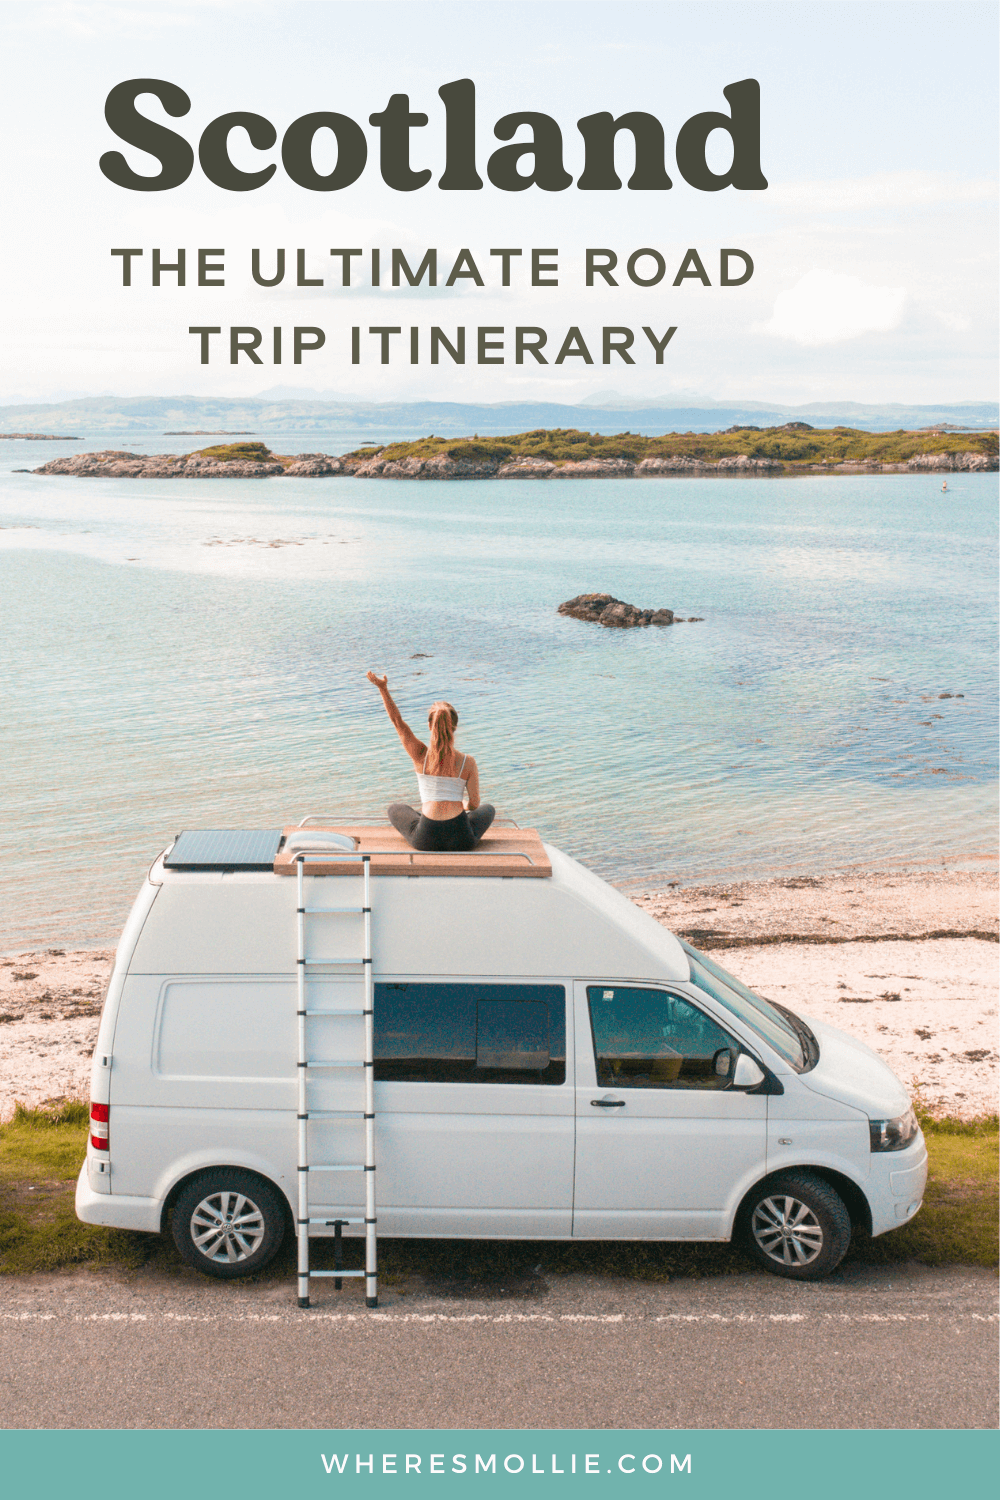 A 2-week road trip itinerary for Scotland